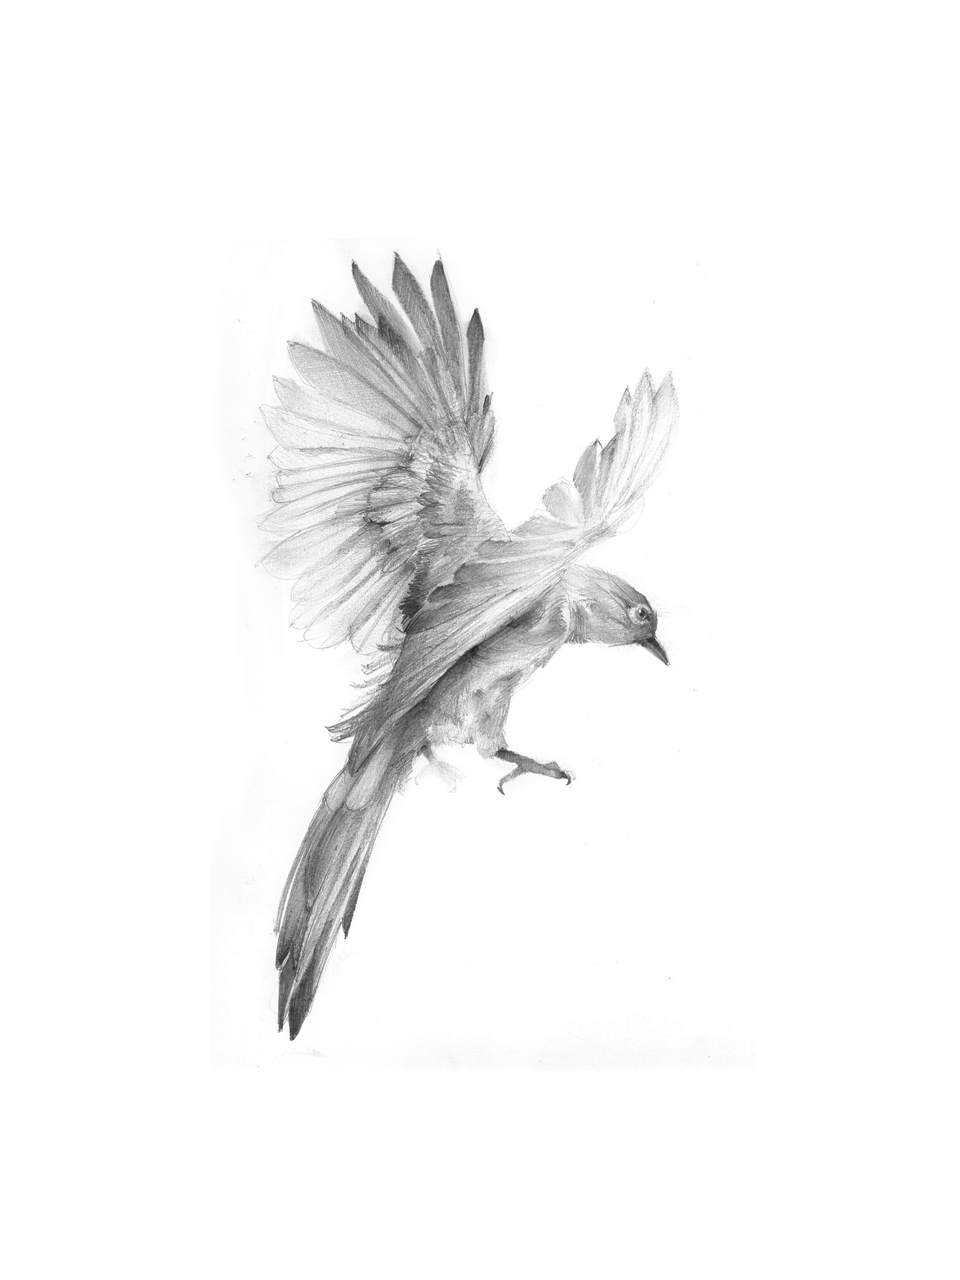 birds flight flying birds sketching sketch feathers Fly bird black and white black White paper poster pencil Flying romania charcoal draw framed